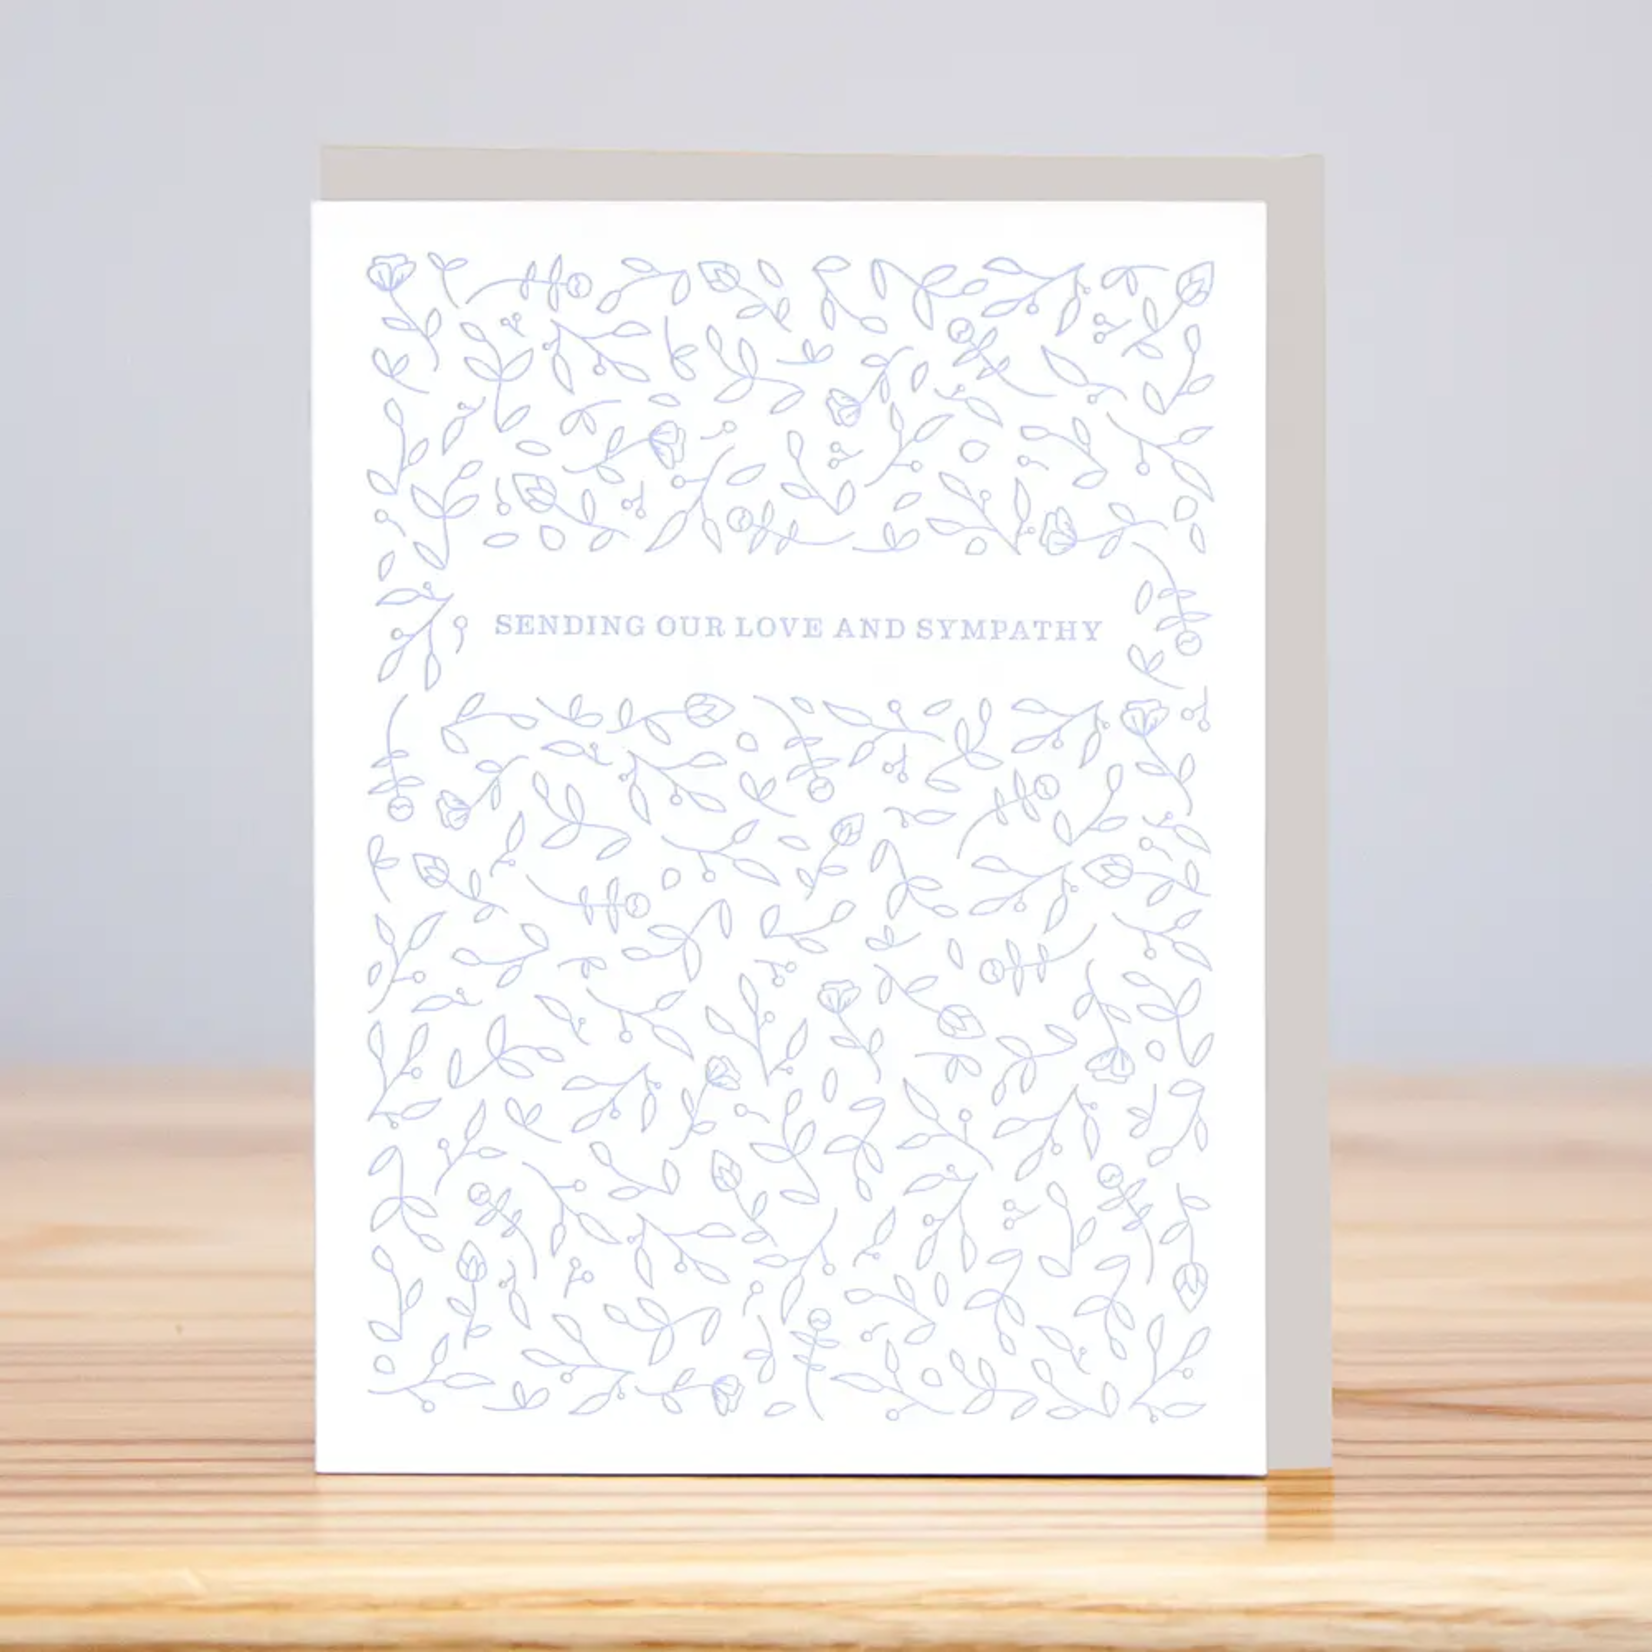 Huckleberry Letterpress Sending Love and Sympathy Greeting Card